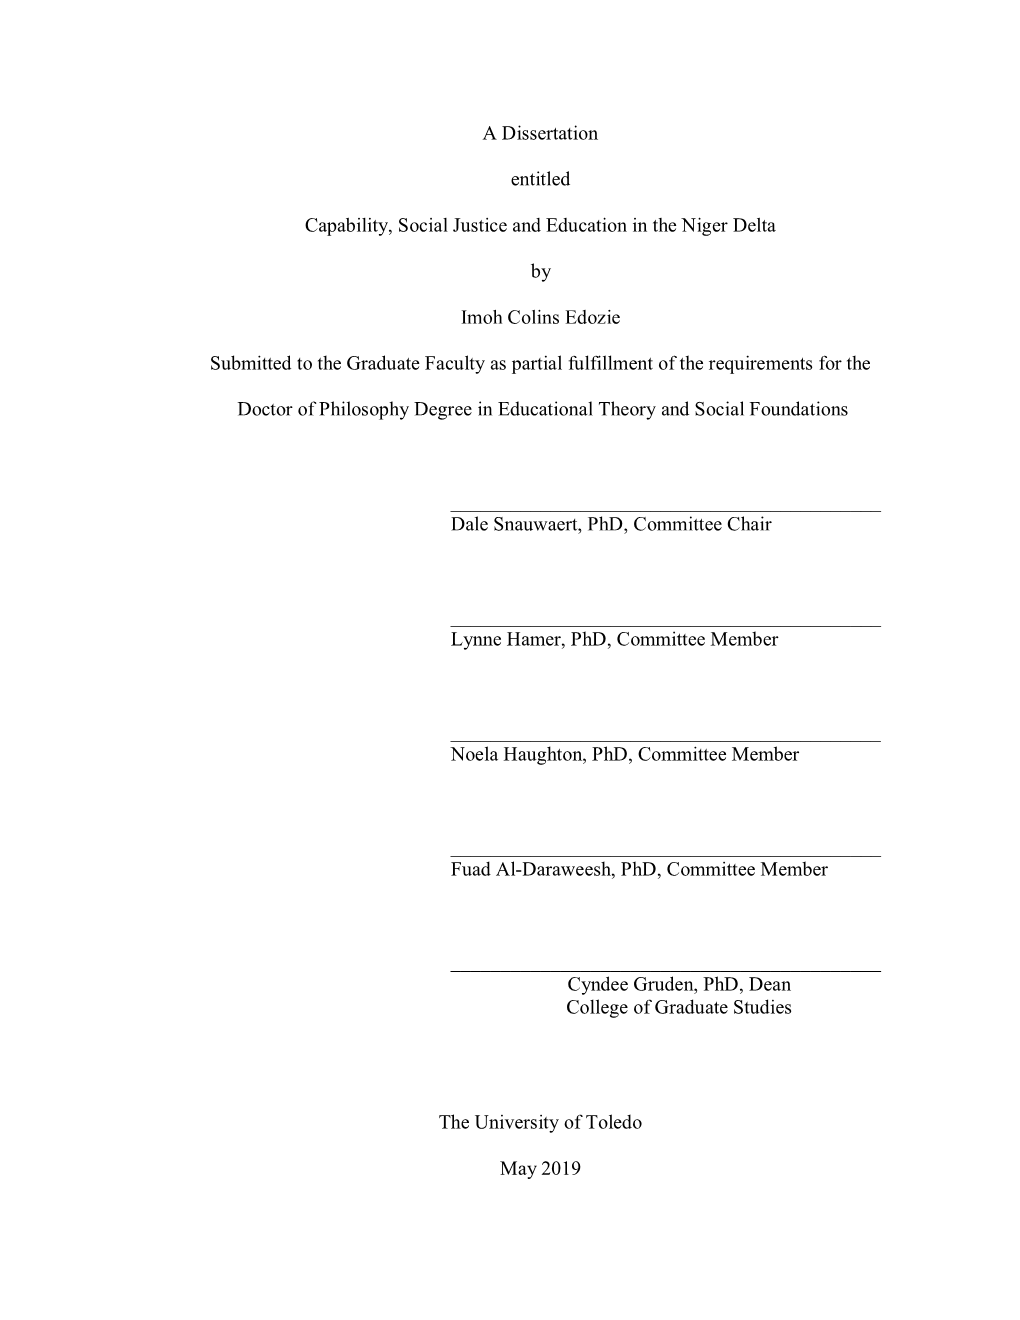 A Dissertation Entitled Capability, Social Justice and Education in The